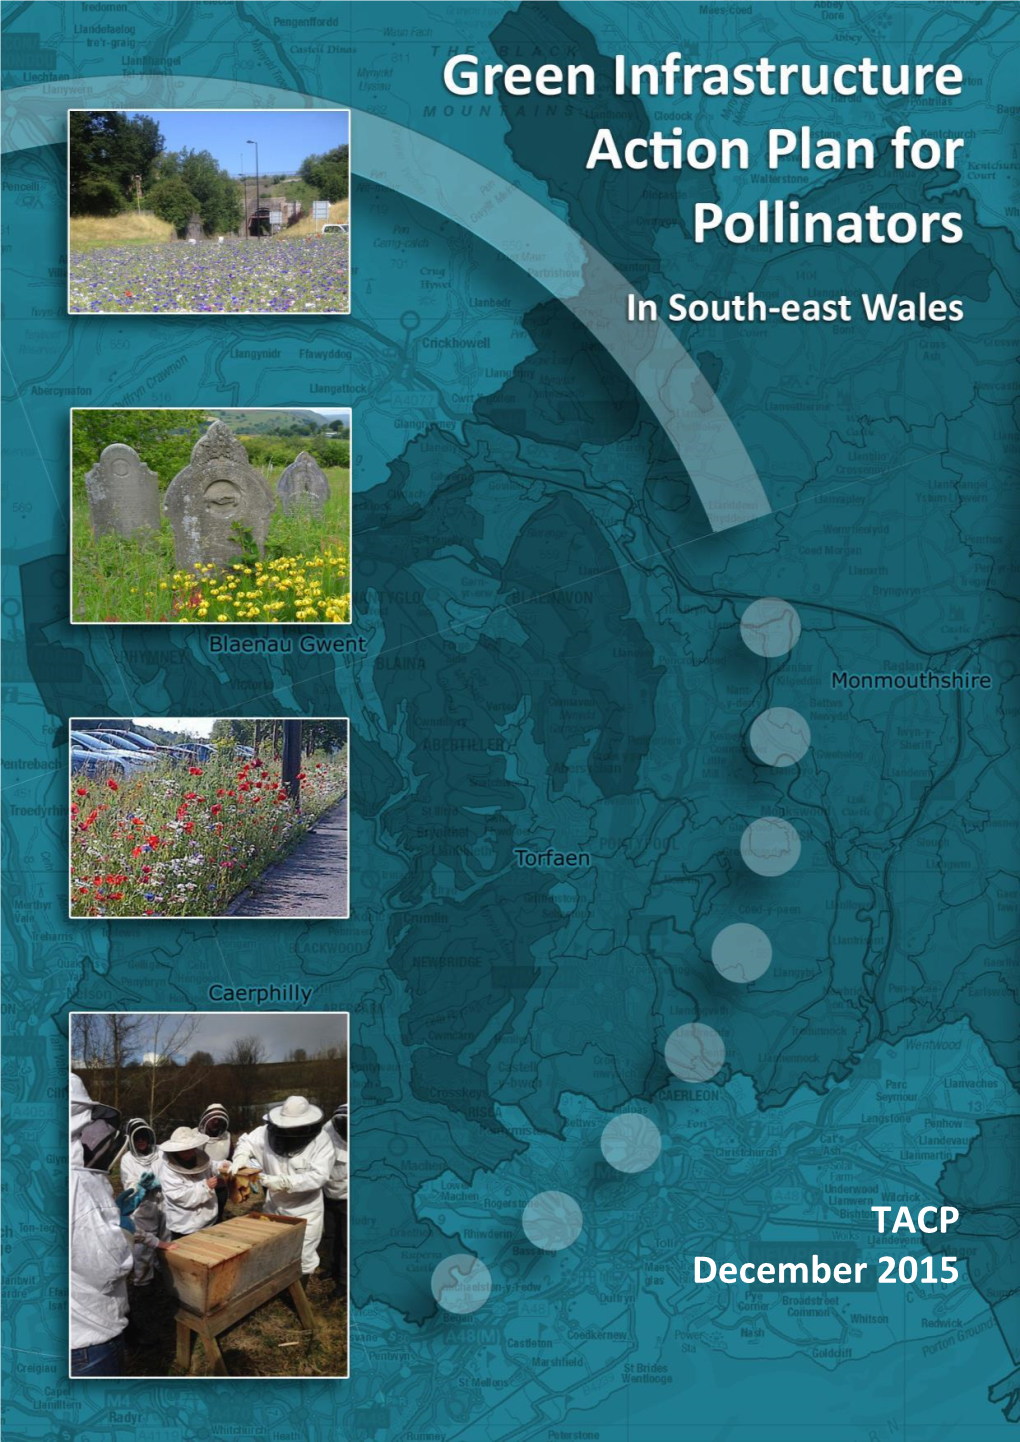 Green Infrastructure Action Plan for Pollinators in South-East Wales